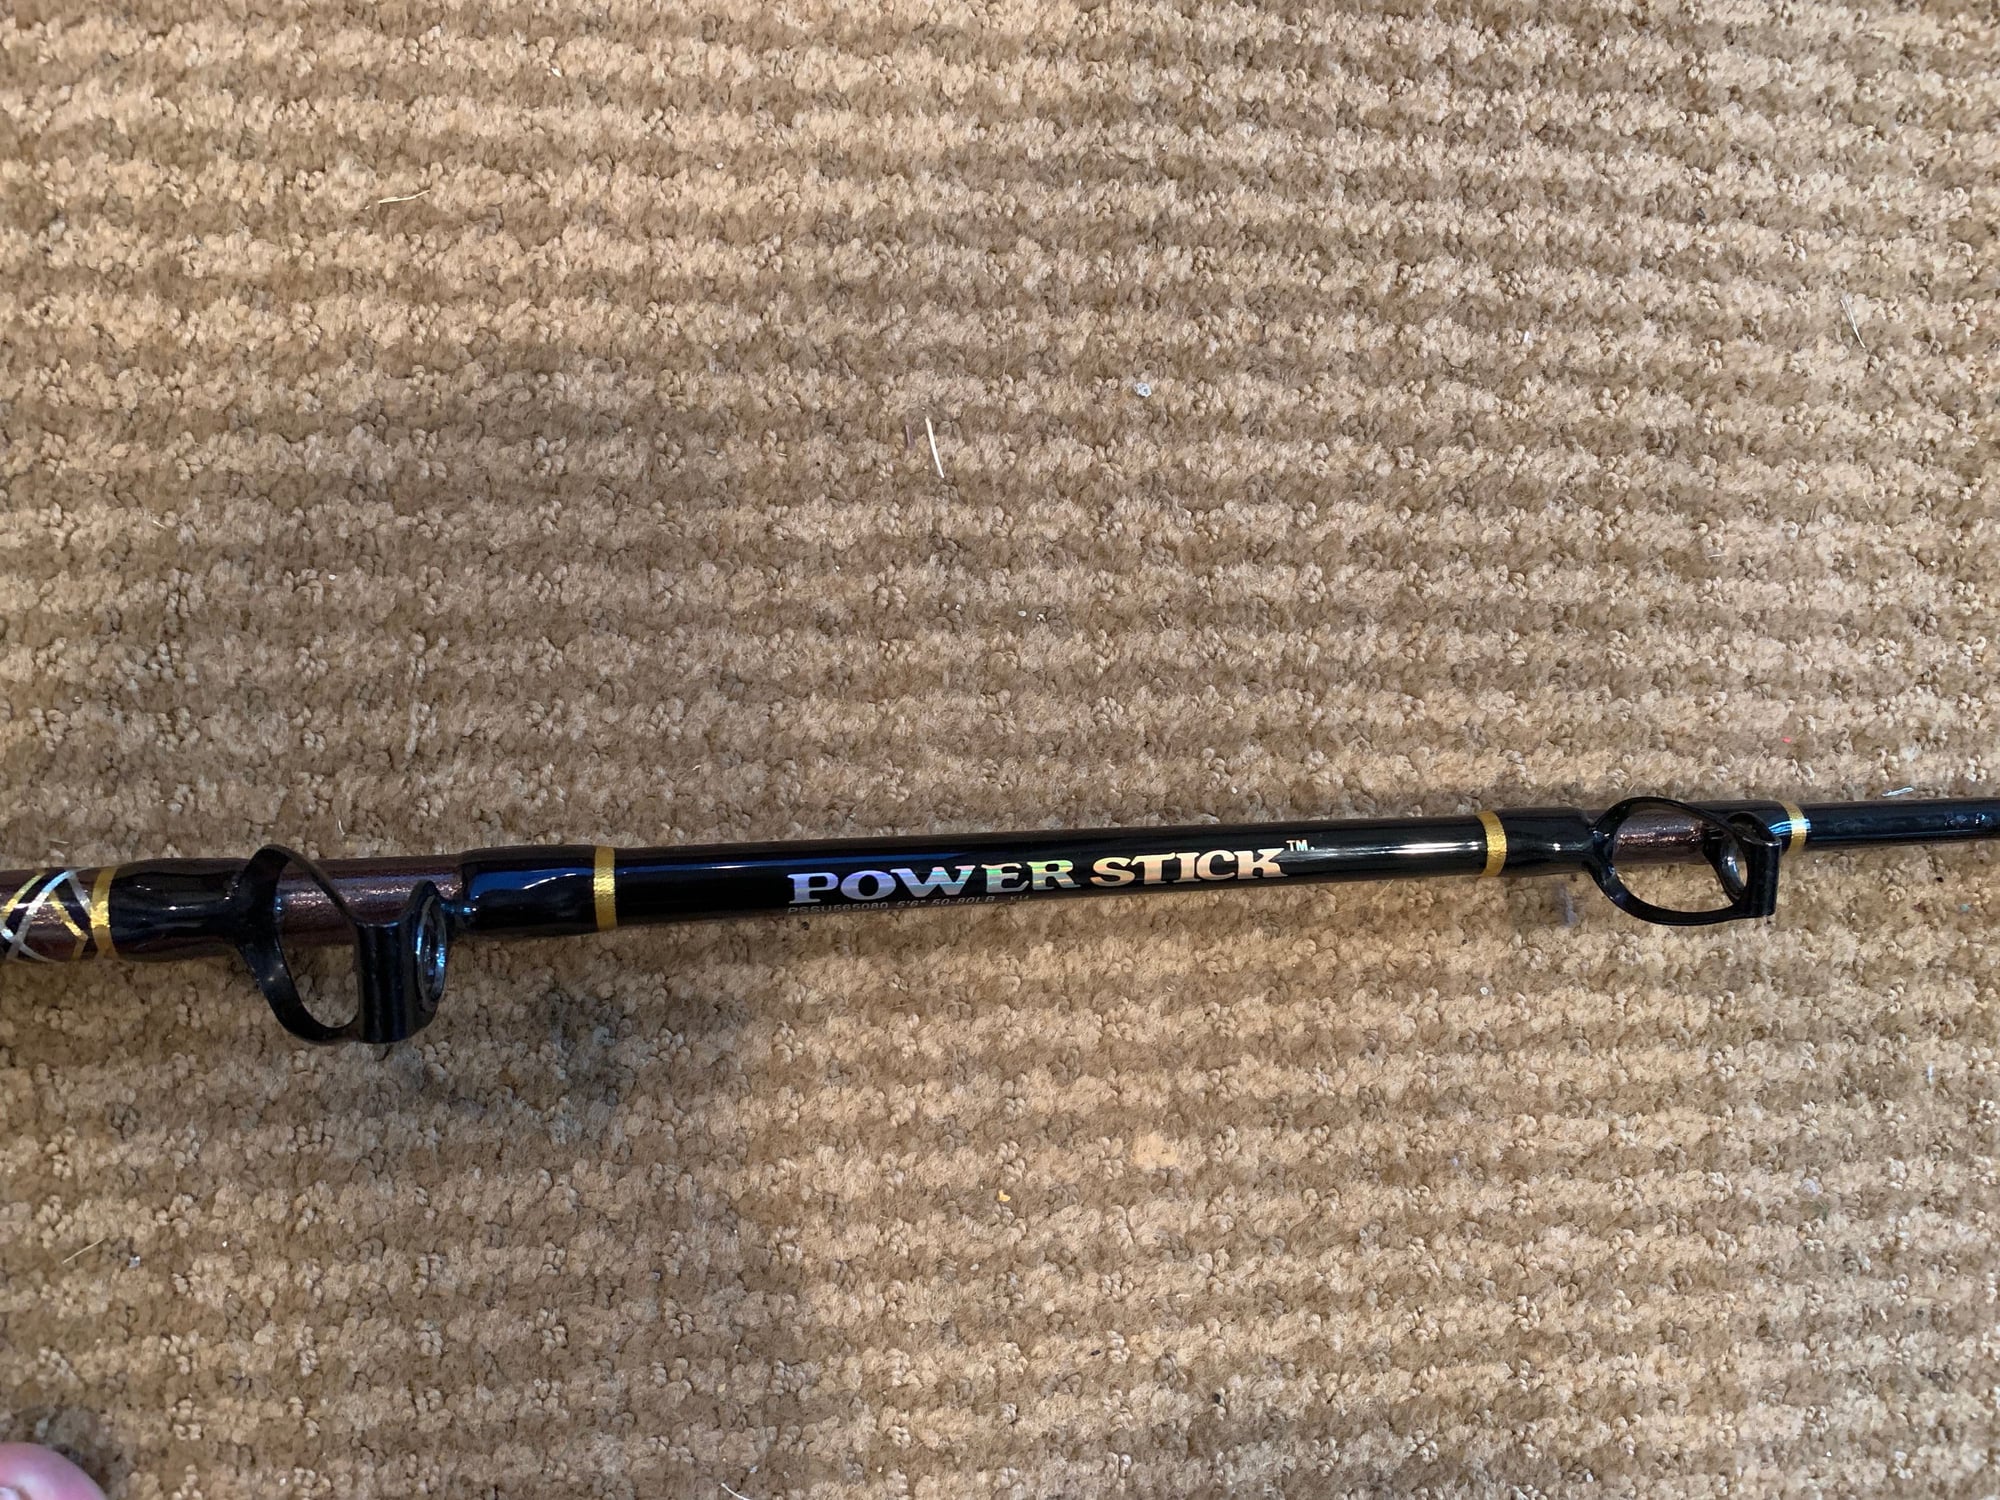 Tuna Rod/Reel Combos - Penn 70VSS, 50VSW, 50TW - The Hull Truth - Boating  and Fishing Forum